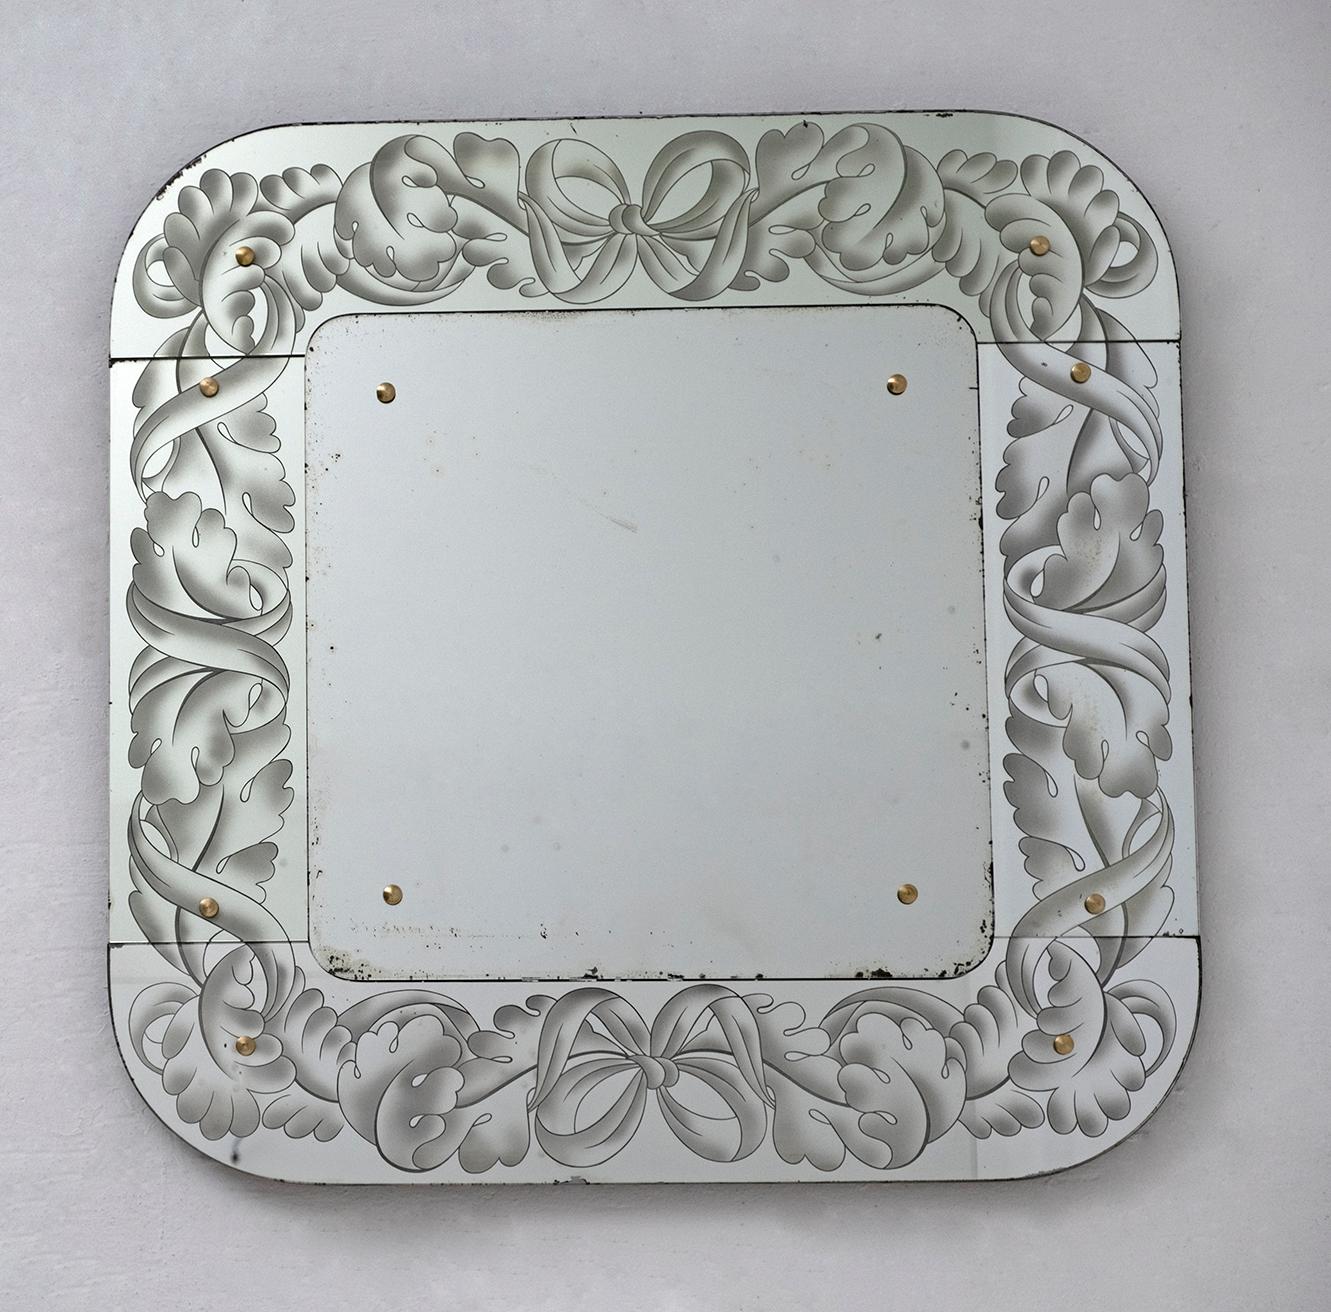 This elegant Venetian Art Nouveau mirror was made in Italy, in the 1950s. It has a square shape with rounded corners, mirrors engraved around it with Art Nouveau decorations and a mirror in the center. With its charming yet refined aesthetic, this